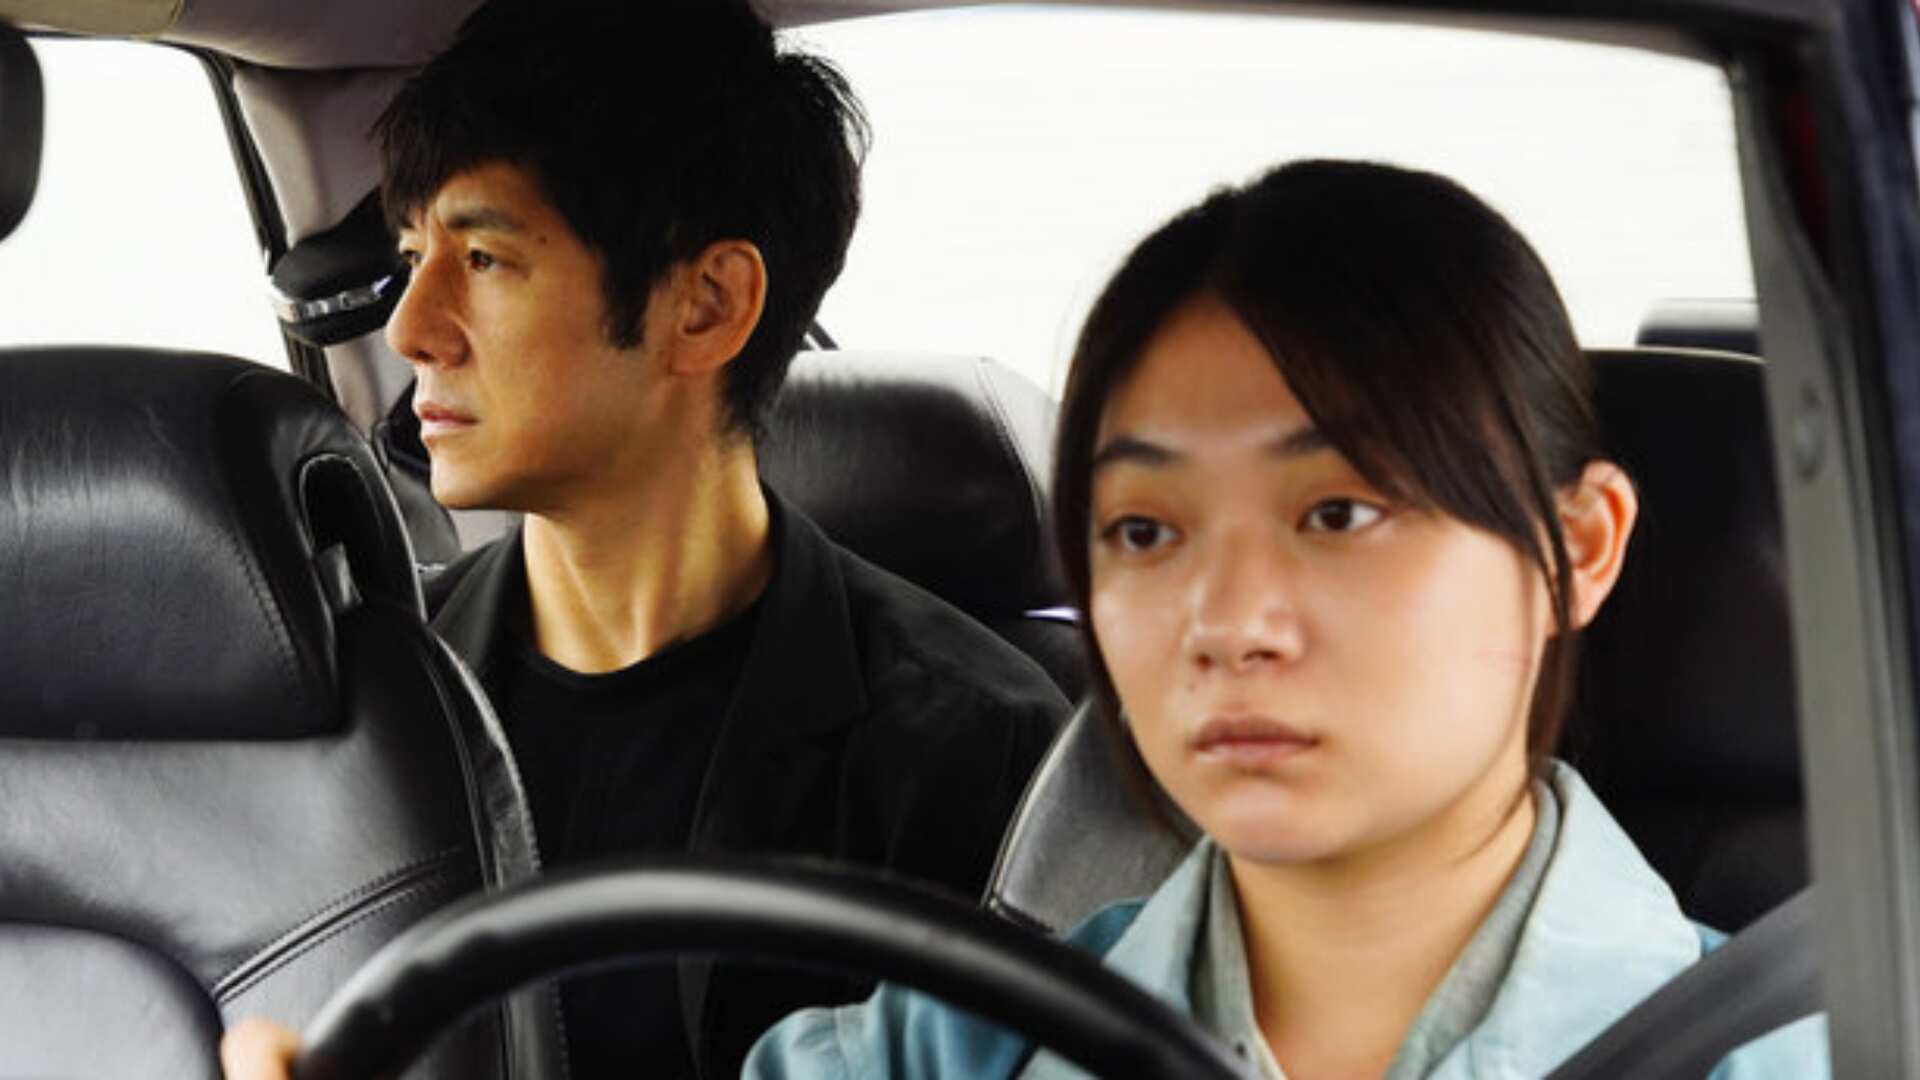 The Oscar for Best International Feature Film goes to Drive My Car